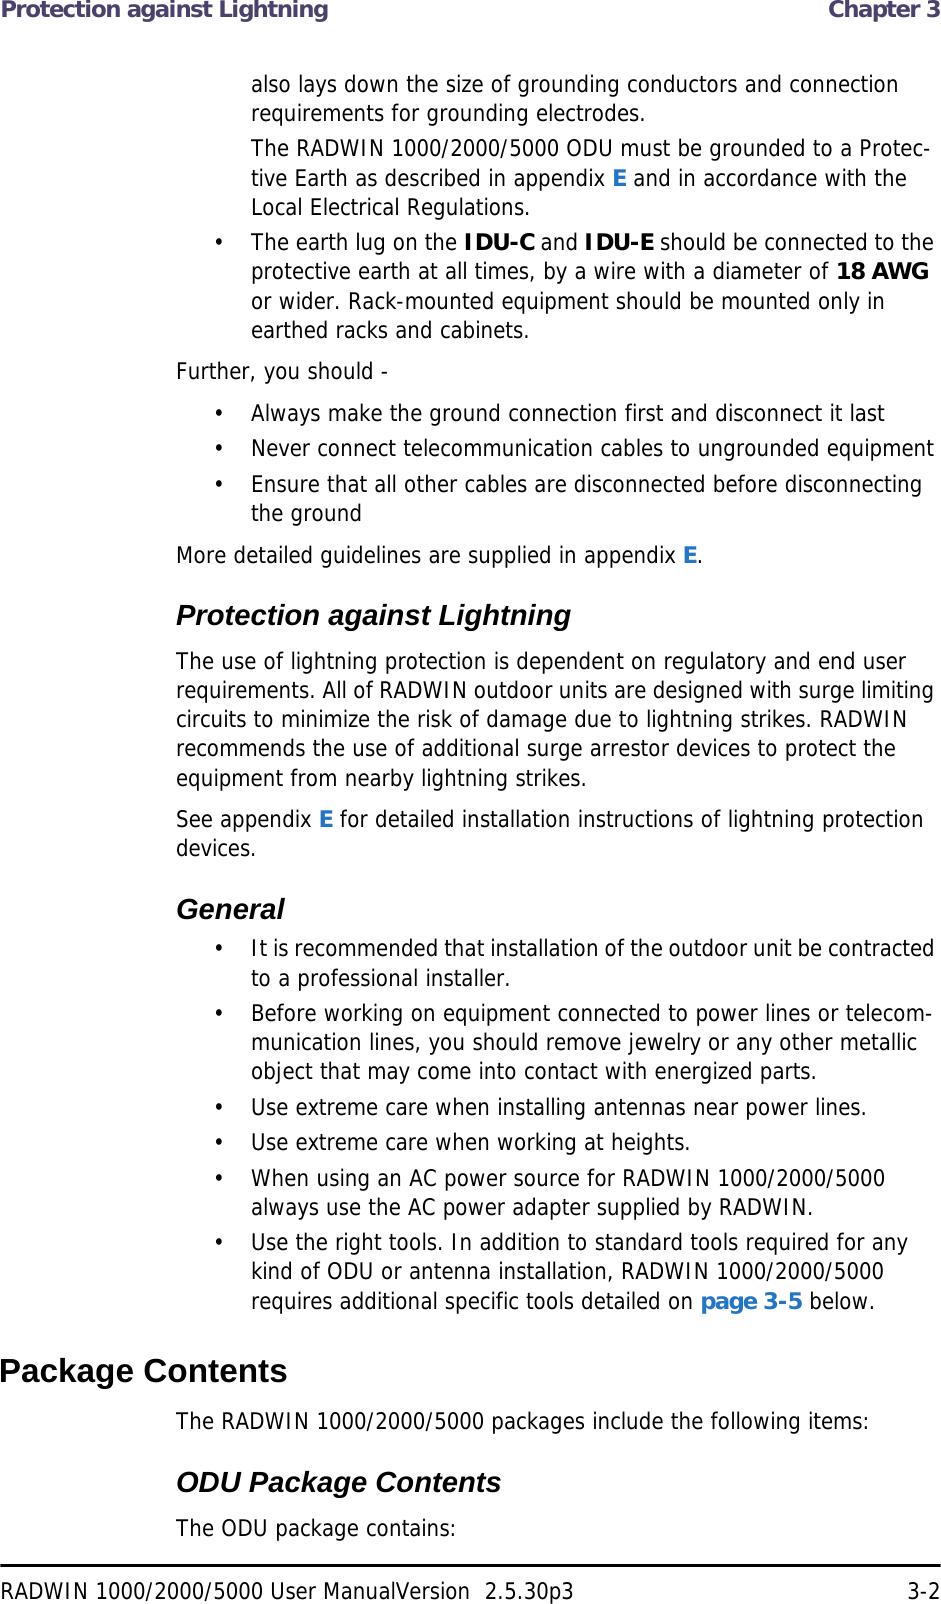 Protection against Lightning  Chapter 3RADWIN 1000/2000/5000 User ManualVersion  2.5.30p3 3-2also lays down the size of grounding conductors and connection requirements for grounding electrodes.The RADWIN 1000/2000/5000 ODU must be grounded to a Protec-tive Earth as described in appendix E and in accordance with the Local Electrical Regulations.• The earth lug on the IDU-C and IDU-E should be connected to the protective earth at all times, by a wire with a diameter of 18 AWG or wider. Rack-mounted equipment should be mounted only in earthed racks and cabinets.Further, you should -• Always make the ground connection first and disconnect it last• Never connect telecommunication cables to ungrounded equipment• Ensure that all other cables are disconnected before disconnecting the groundMore detailed guidelines are supplied in appendix E.Protection against LightningThe use of lightning protection is dependent on regulatory and end user requirements. All of RADWIN outdoor units are designed with surge limiting circuits to minimize the risk of damage due to lightning strikes. RADWIN recommends the use of additional surge arrestor devices to protect the equipment from nearby lightning strikes.See appendix E for detailed installation instructions of lightning protection devices.General• It is recommended that installation of the outdoor unit be contracted to a professional installer.• Before working on equipment connected to power lines or telecom-munication lines, you should remove jewelry or any other metallic object that may come into contact with energized parts.• Use extreme care when installing antennas near power lines.• Use extreme care when working at heights.• When using an AC power source for RADWIN 1000/2000/5000 always use the AC power adapter supplied by RADWIN.• Use the right tools. In addition to standard tools required for any kind of ODU or antenna installation, RADWIN 1000/2000/5000 requires additional specific tools detailed on page 3-5 below.Package ContentsThe RADWIN 1000/2000/5000 packages include the following items:ODU Package ContentsThe ODU package contains: